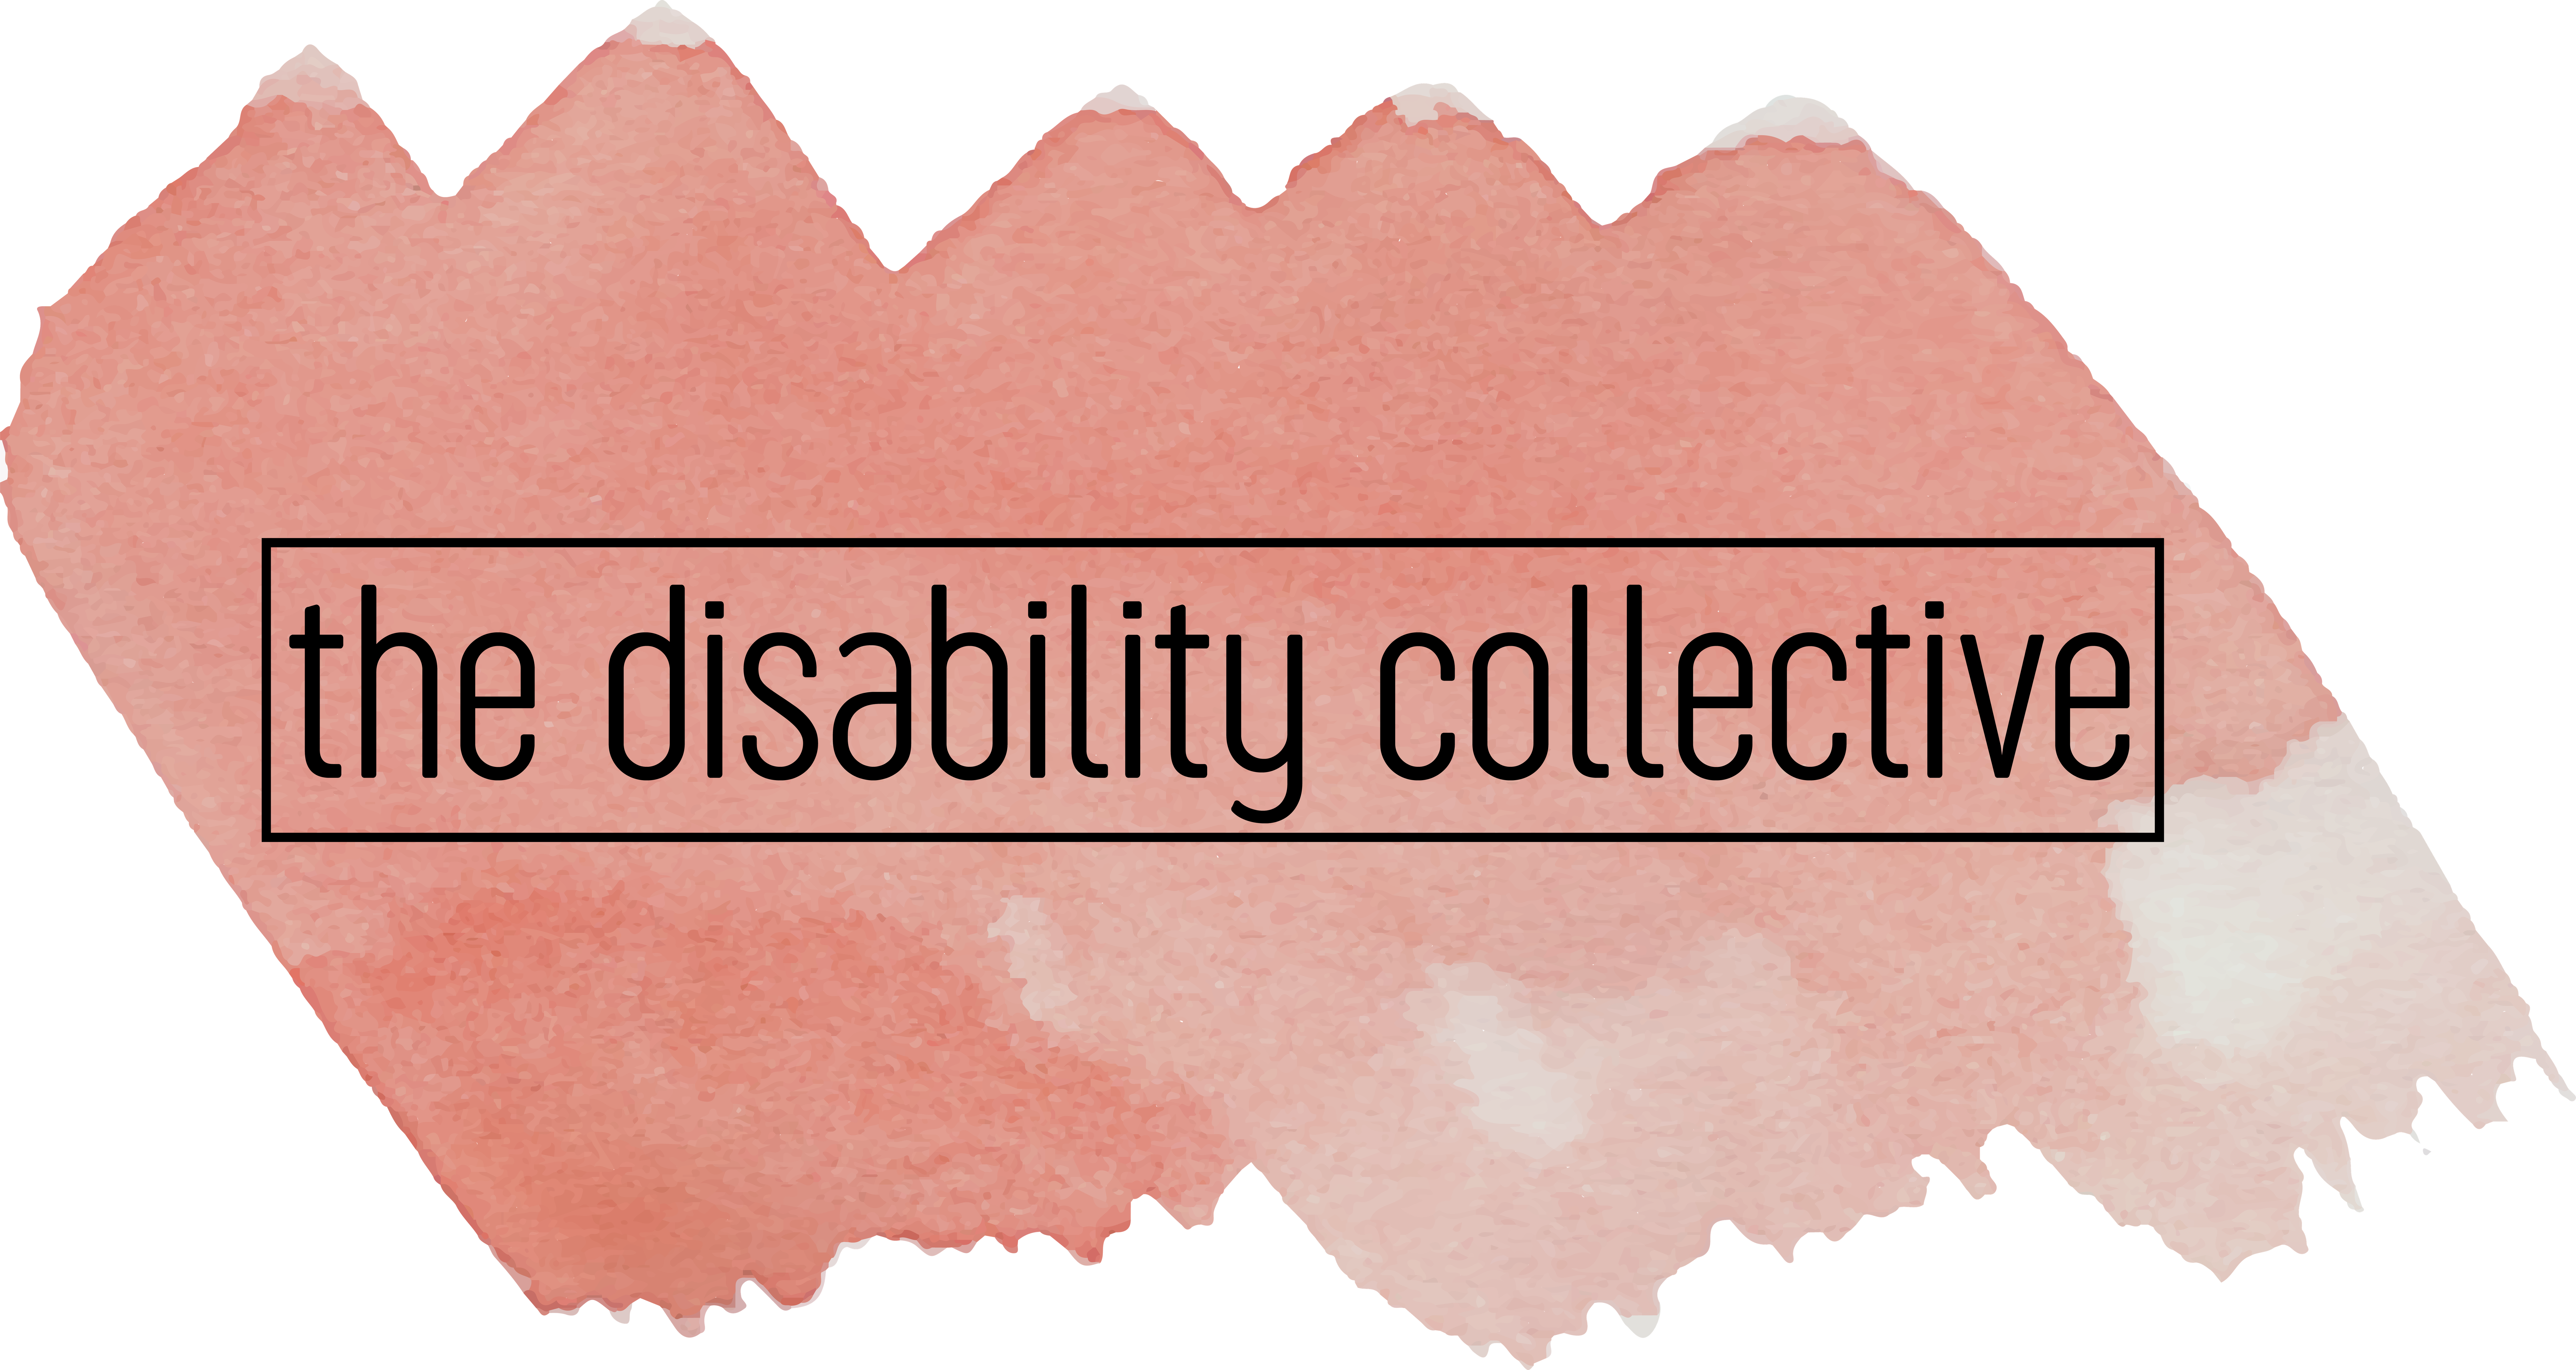 The Disability Collective logo, featuring the company name in black font inside of a black rectangular box against a coral swatch of water colour paint.